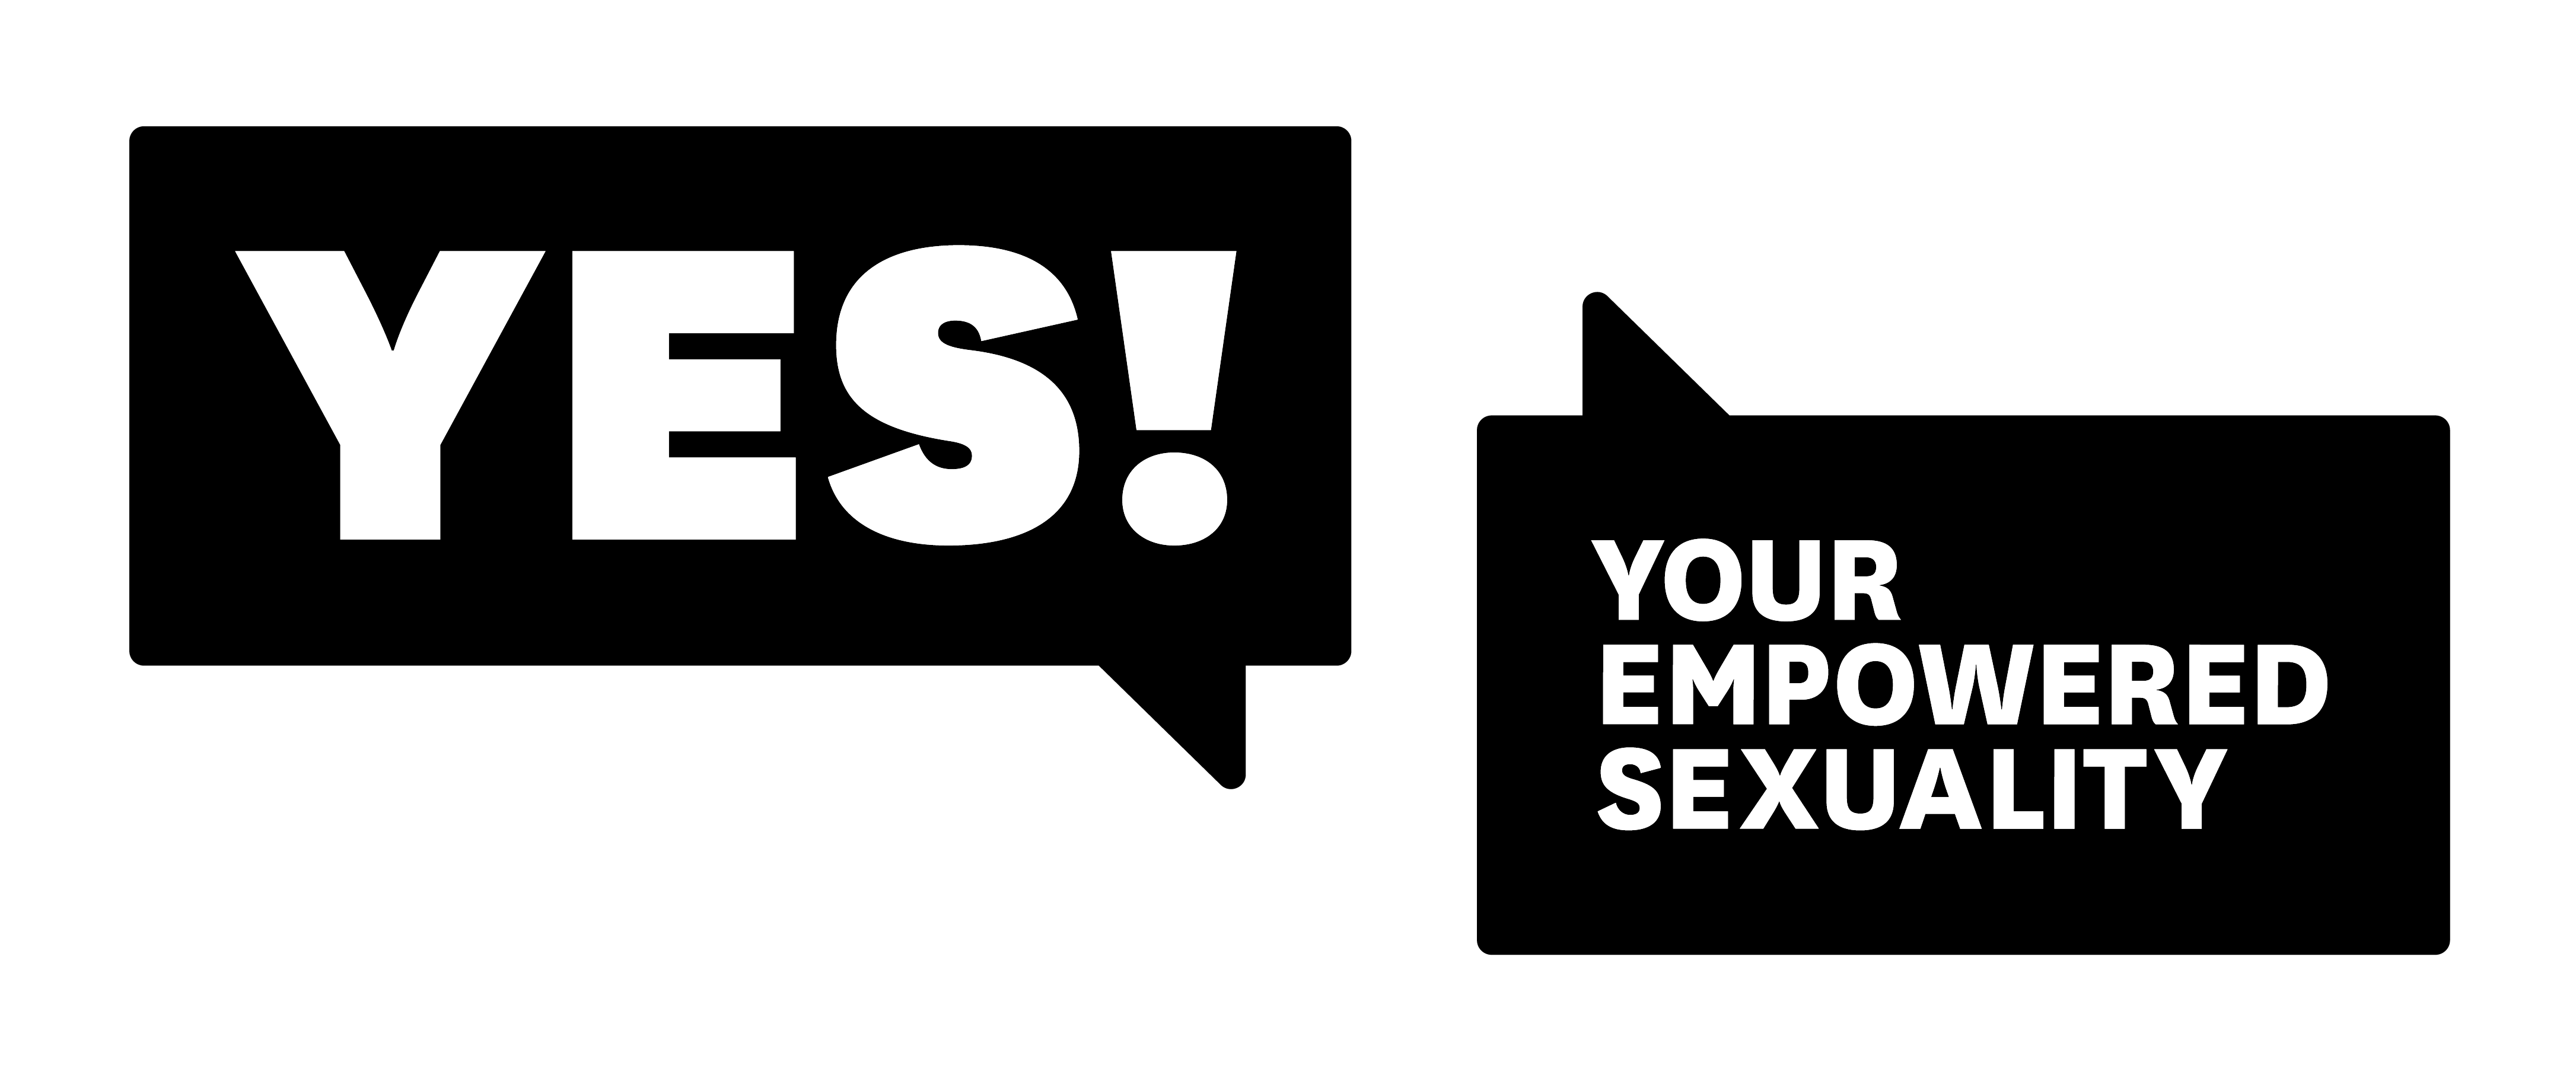 Your Empowered Sexuality (YES!) logo